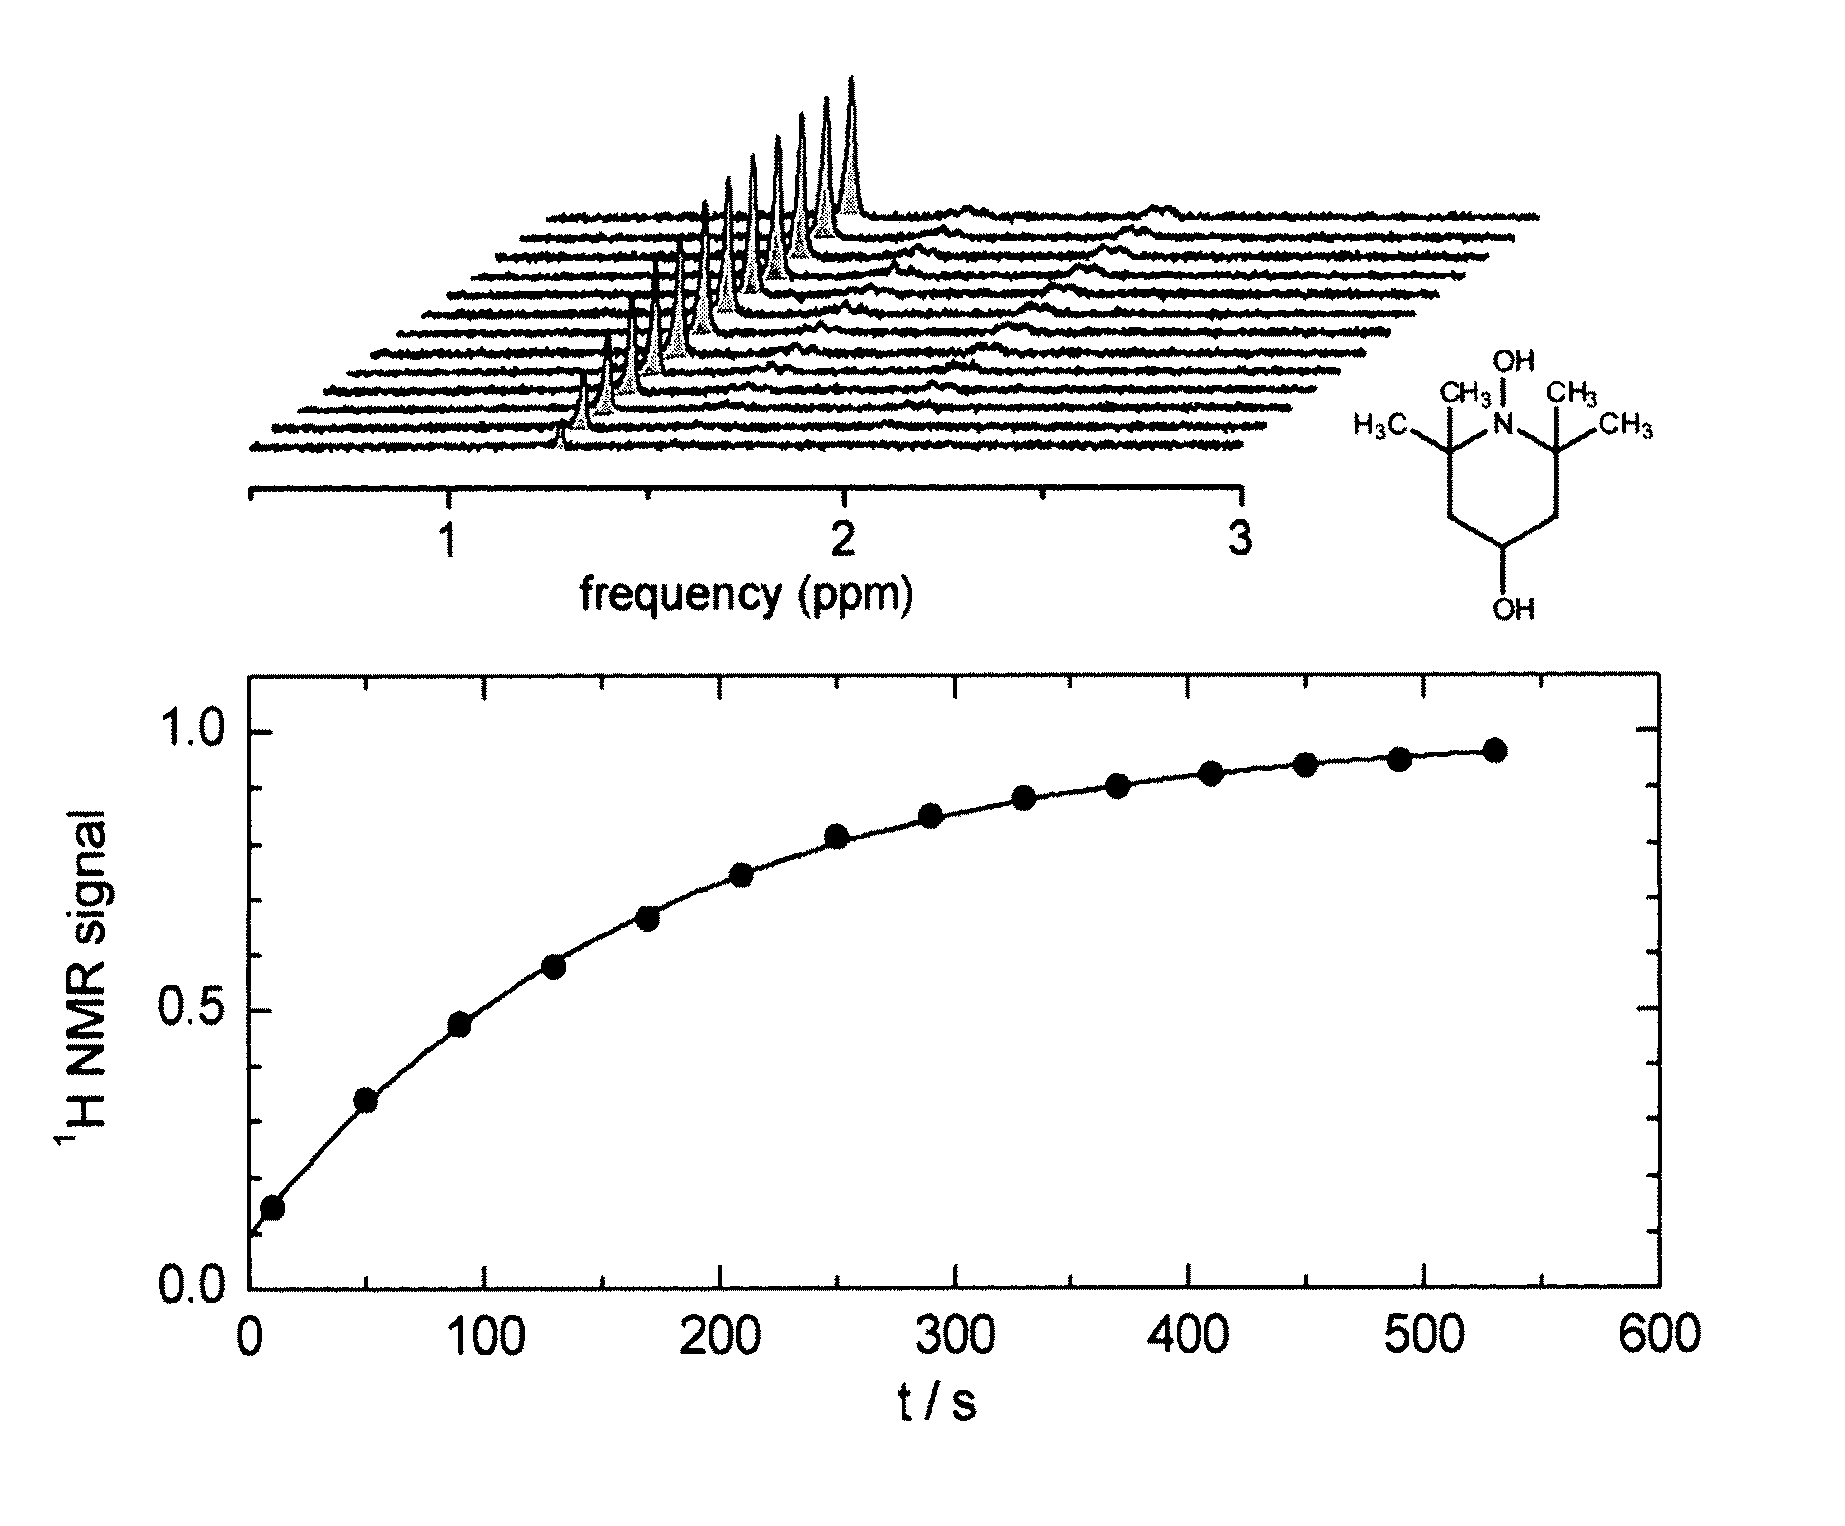 Method for NMR spectroscopy or MRI measurements using dissolution dynamic nuclear polarization (DNP) with scavenging of free radicals